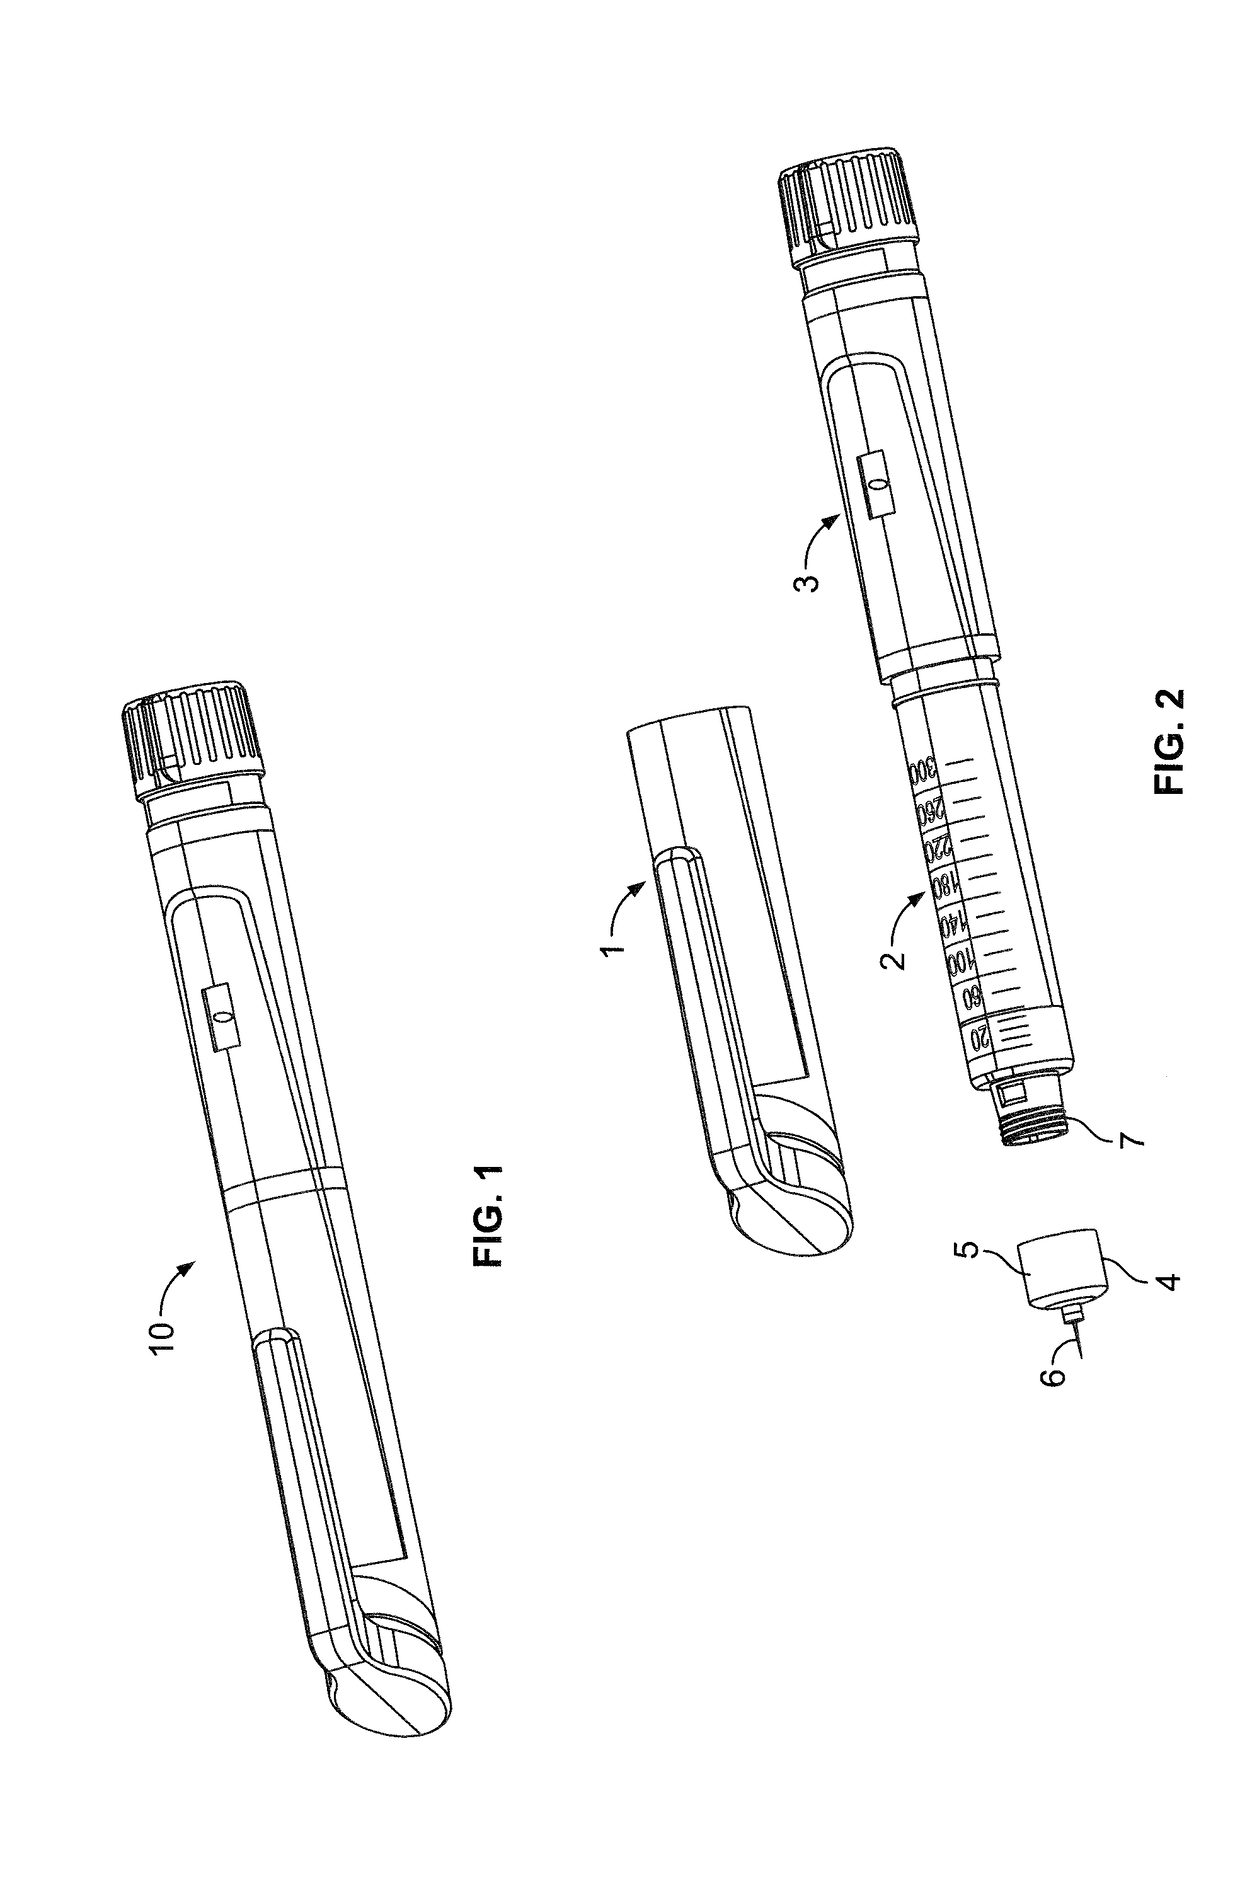 Injection device with flexible dose selection